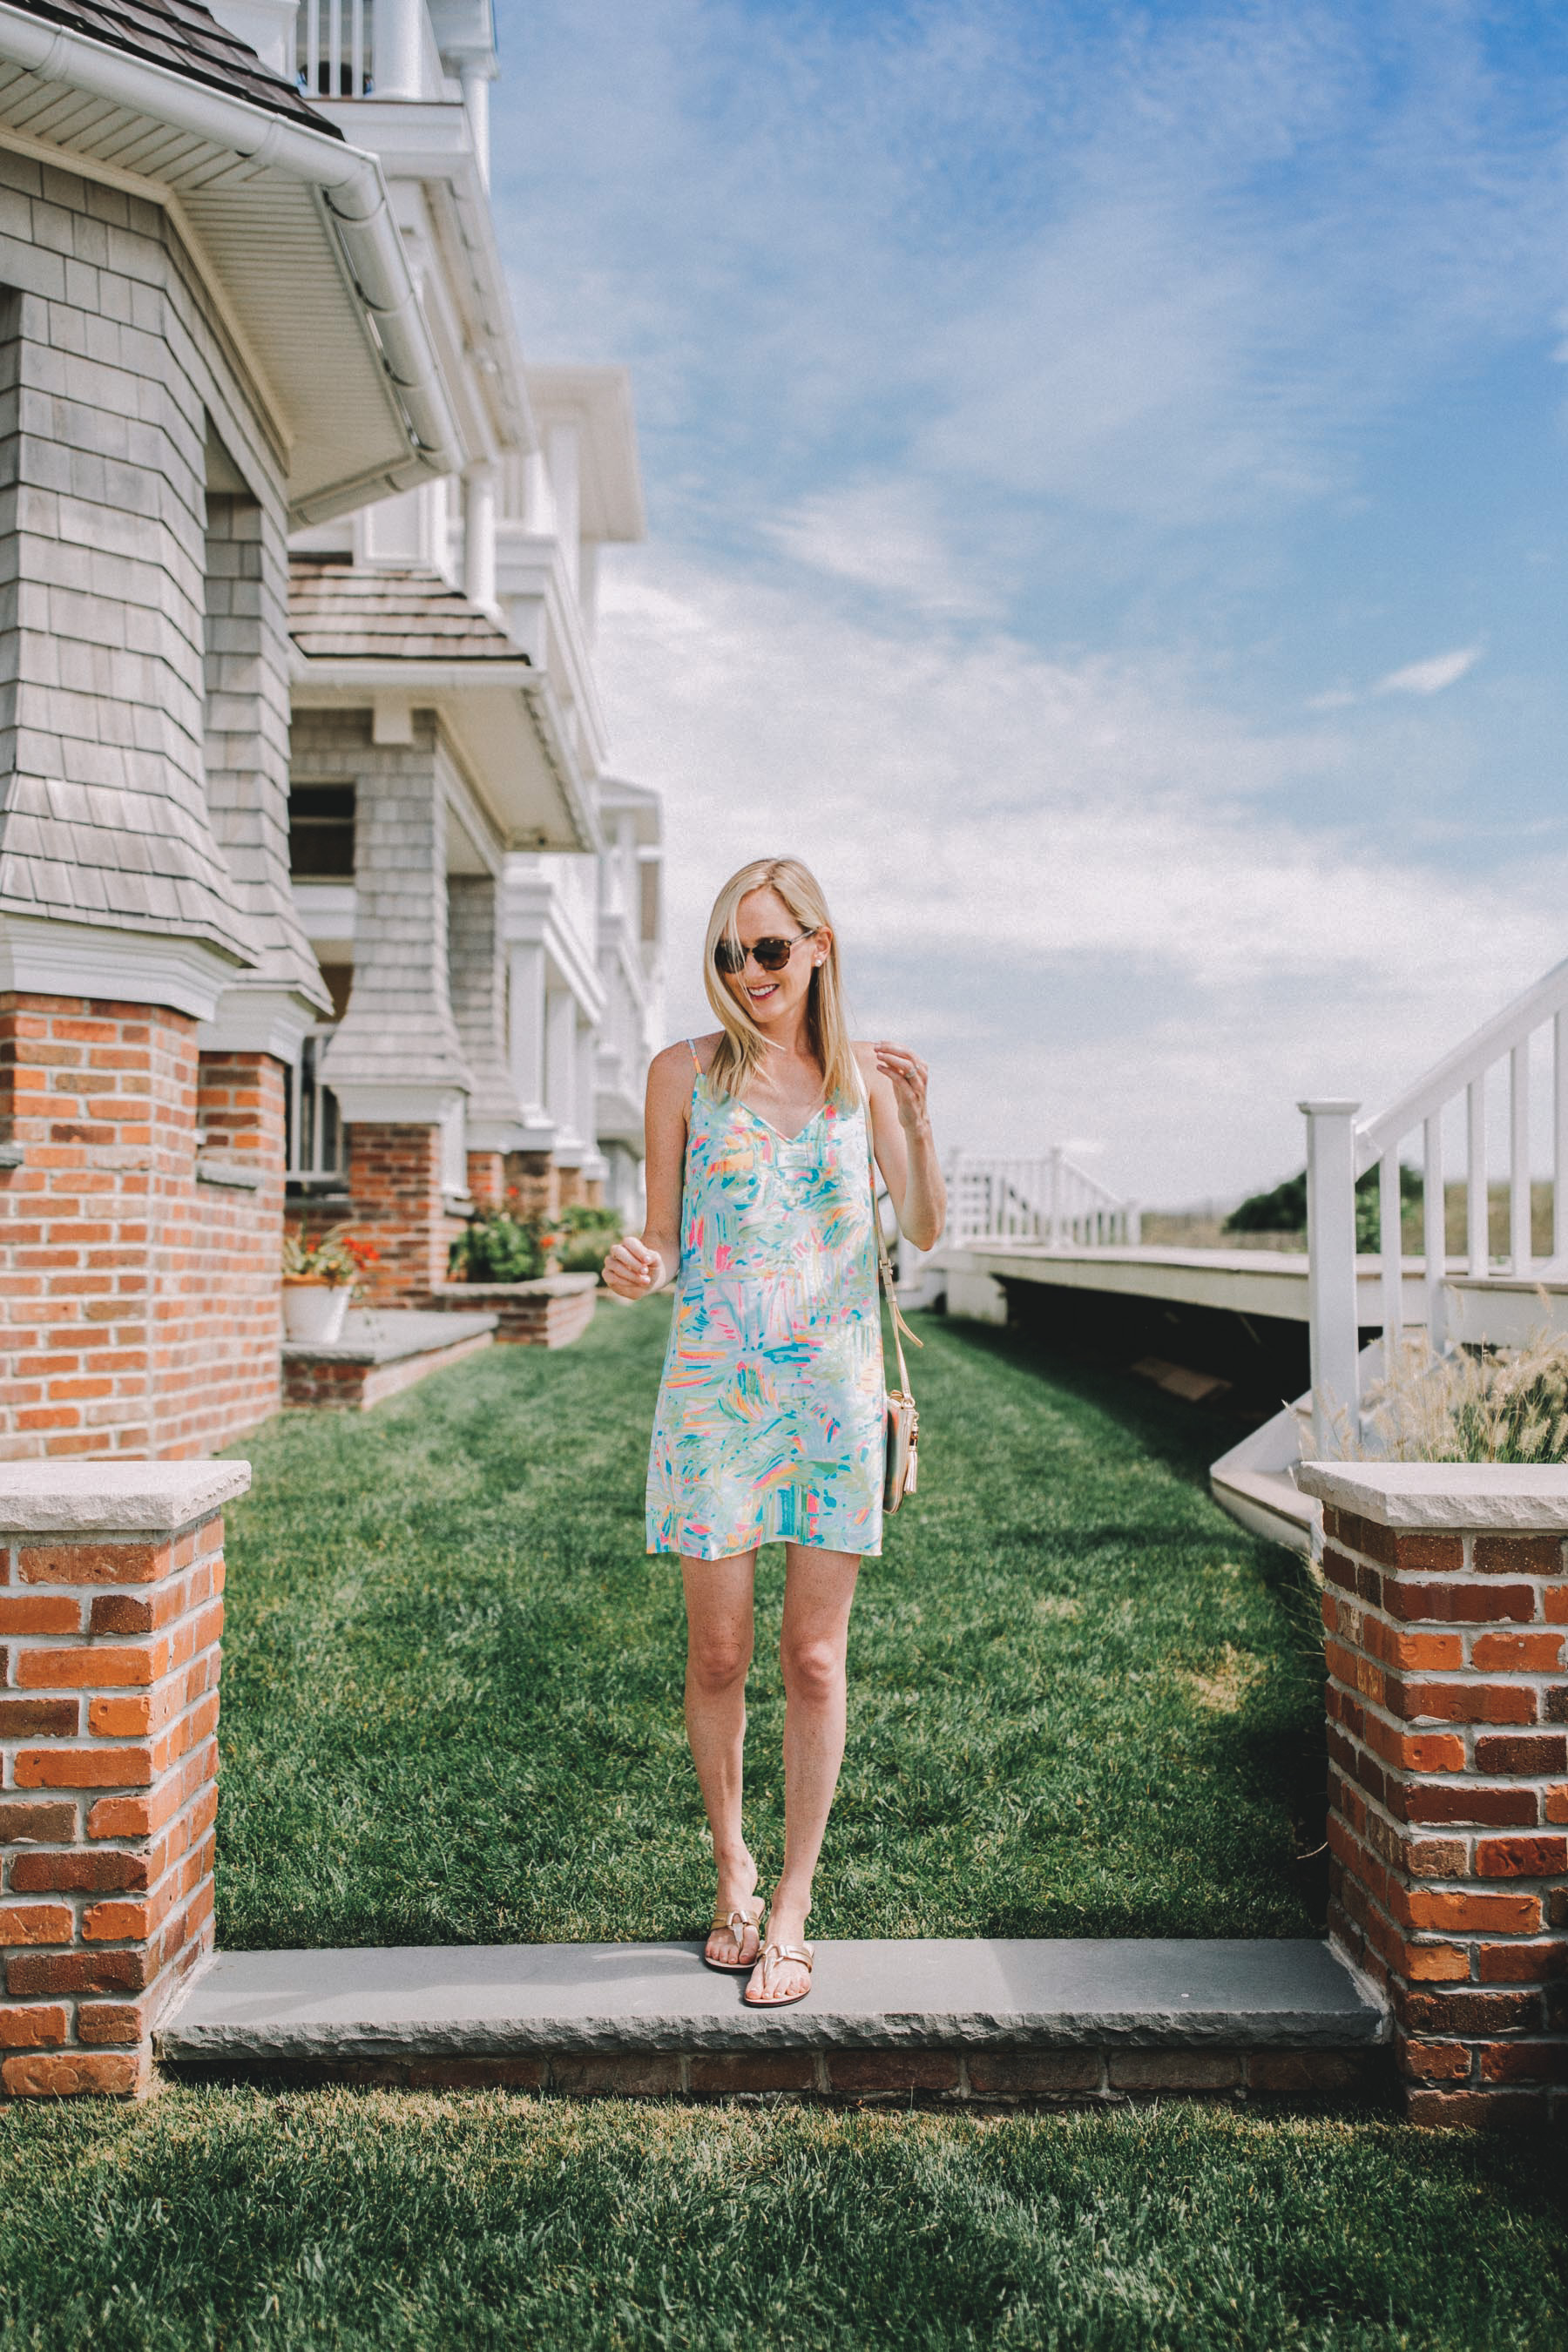 Giveaway Winner, New Styles + What We Own From the Sale